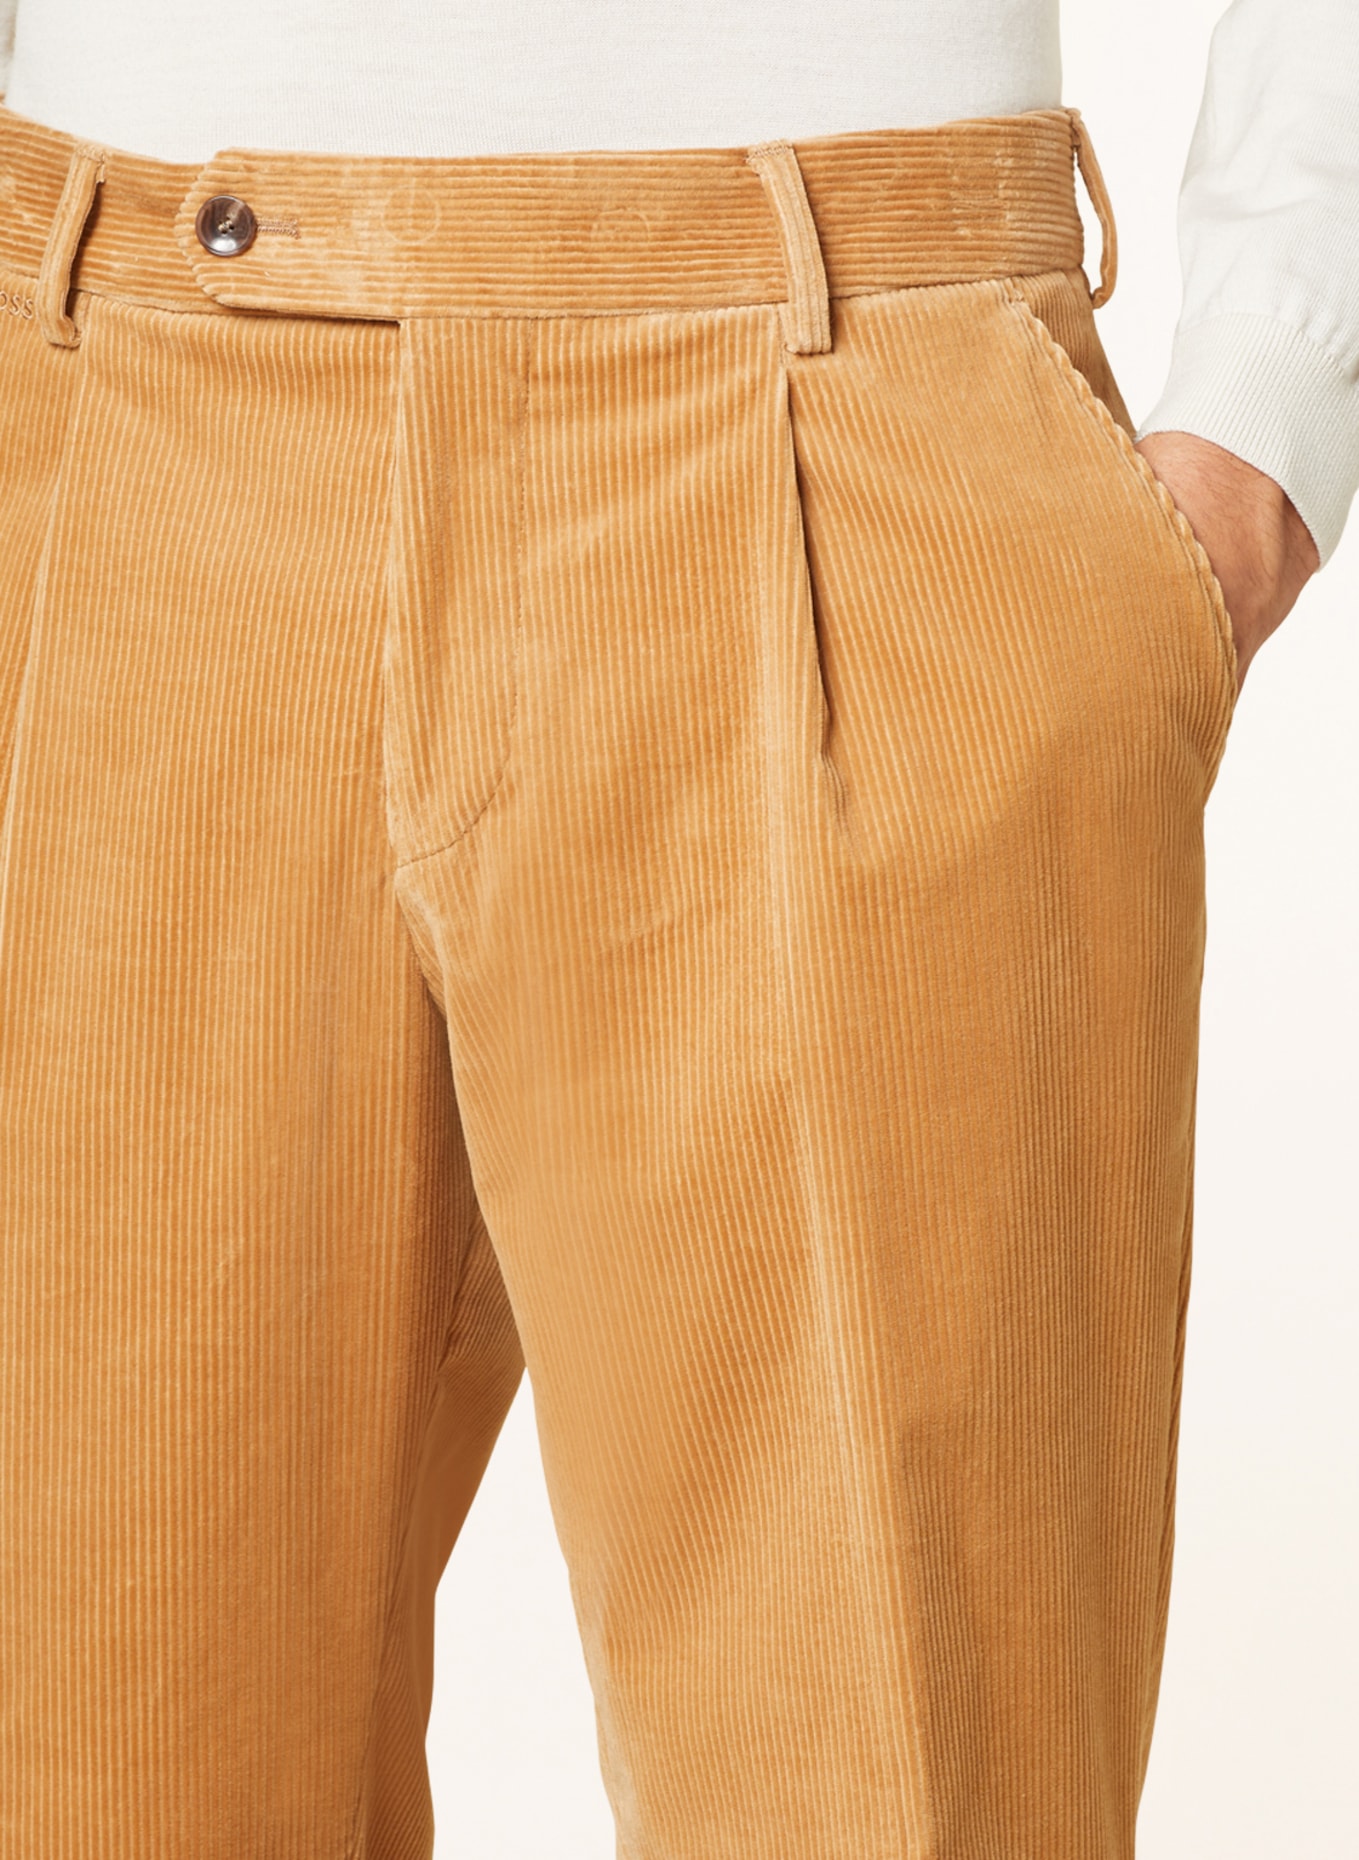 BOSS Cordhose H-PERIN Relaxed Fit, Farbe: CAMEL (Bild 5)